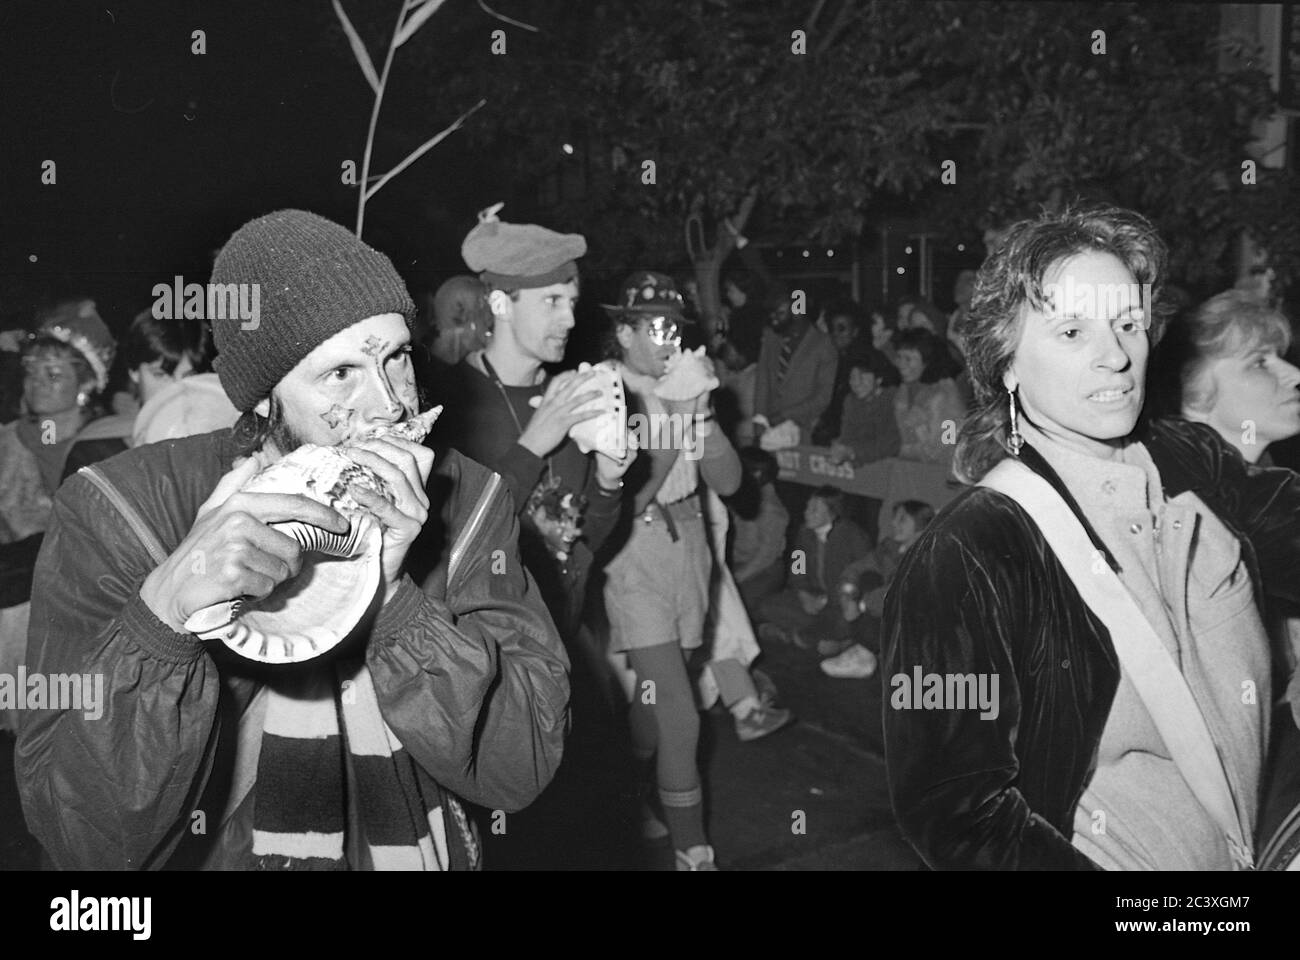 Participants at the Greenwich Village Halloween Parade, New York City, USA in the 1980's  Photographed with Black & White film at night. Stock Photo